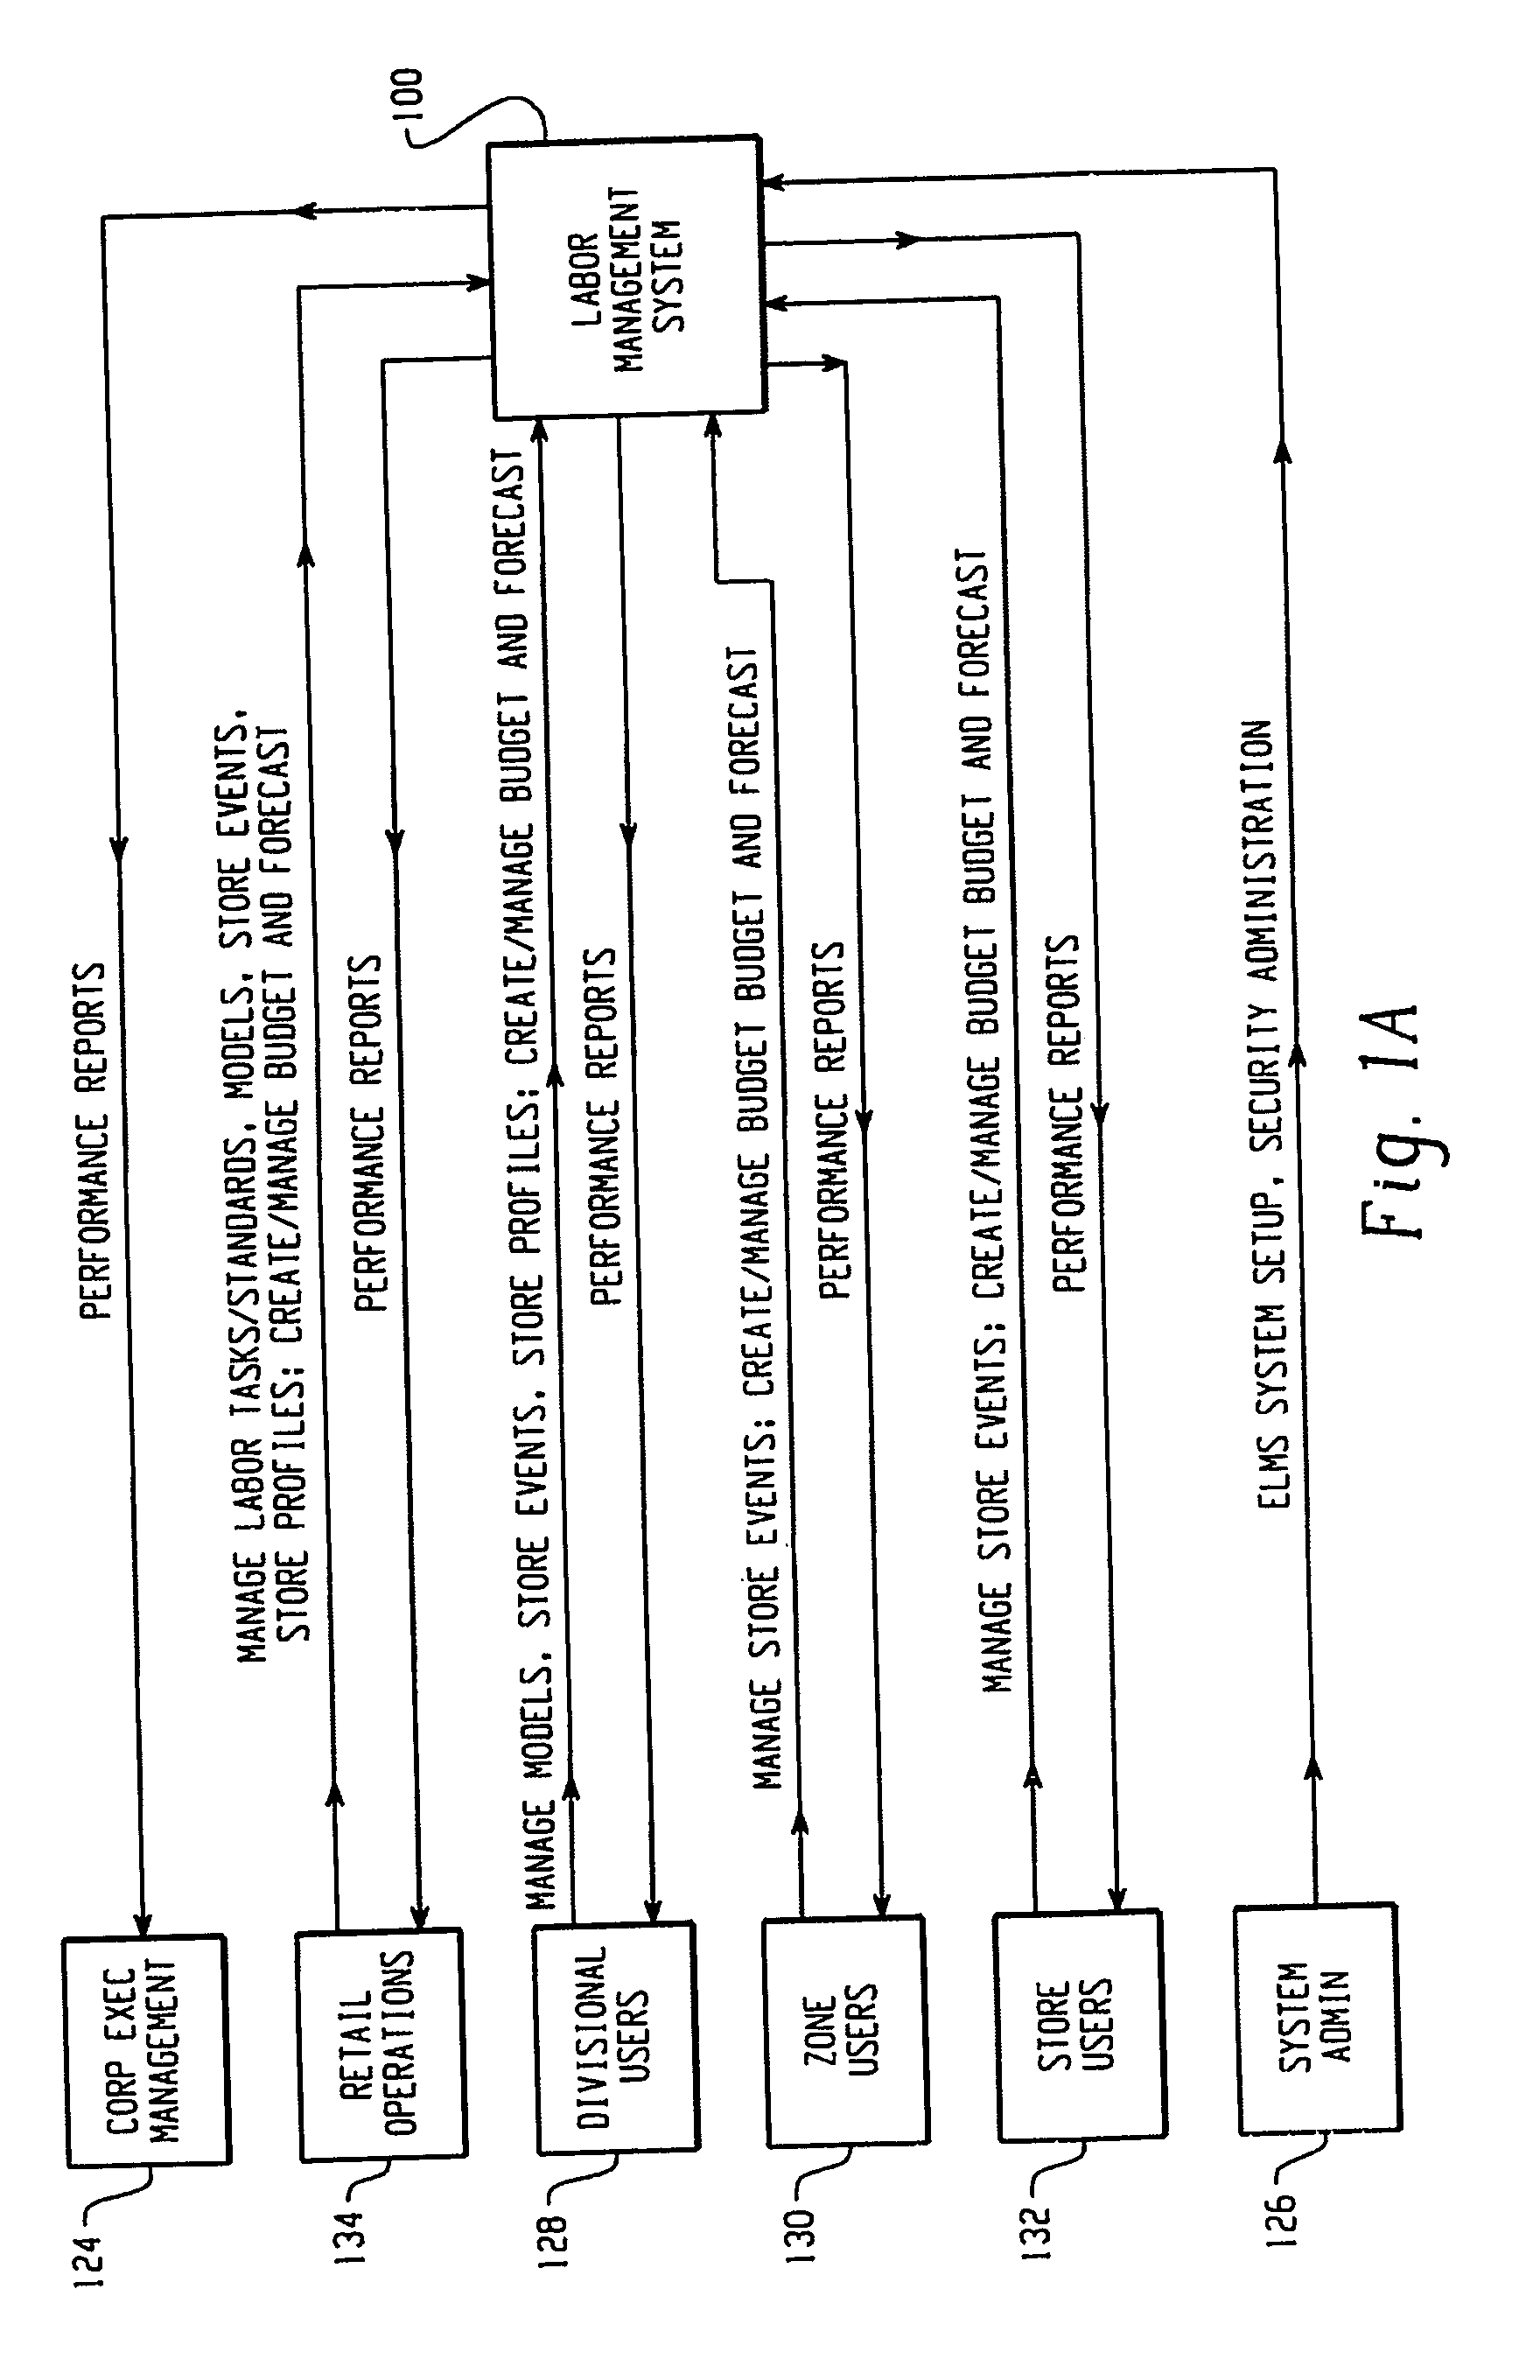 Labor and transaction management system and method